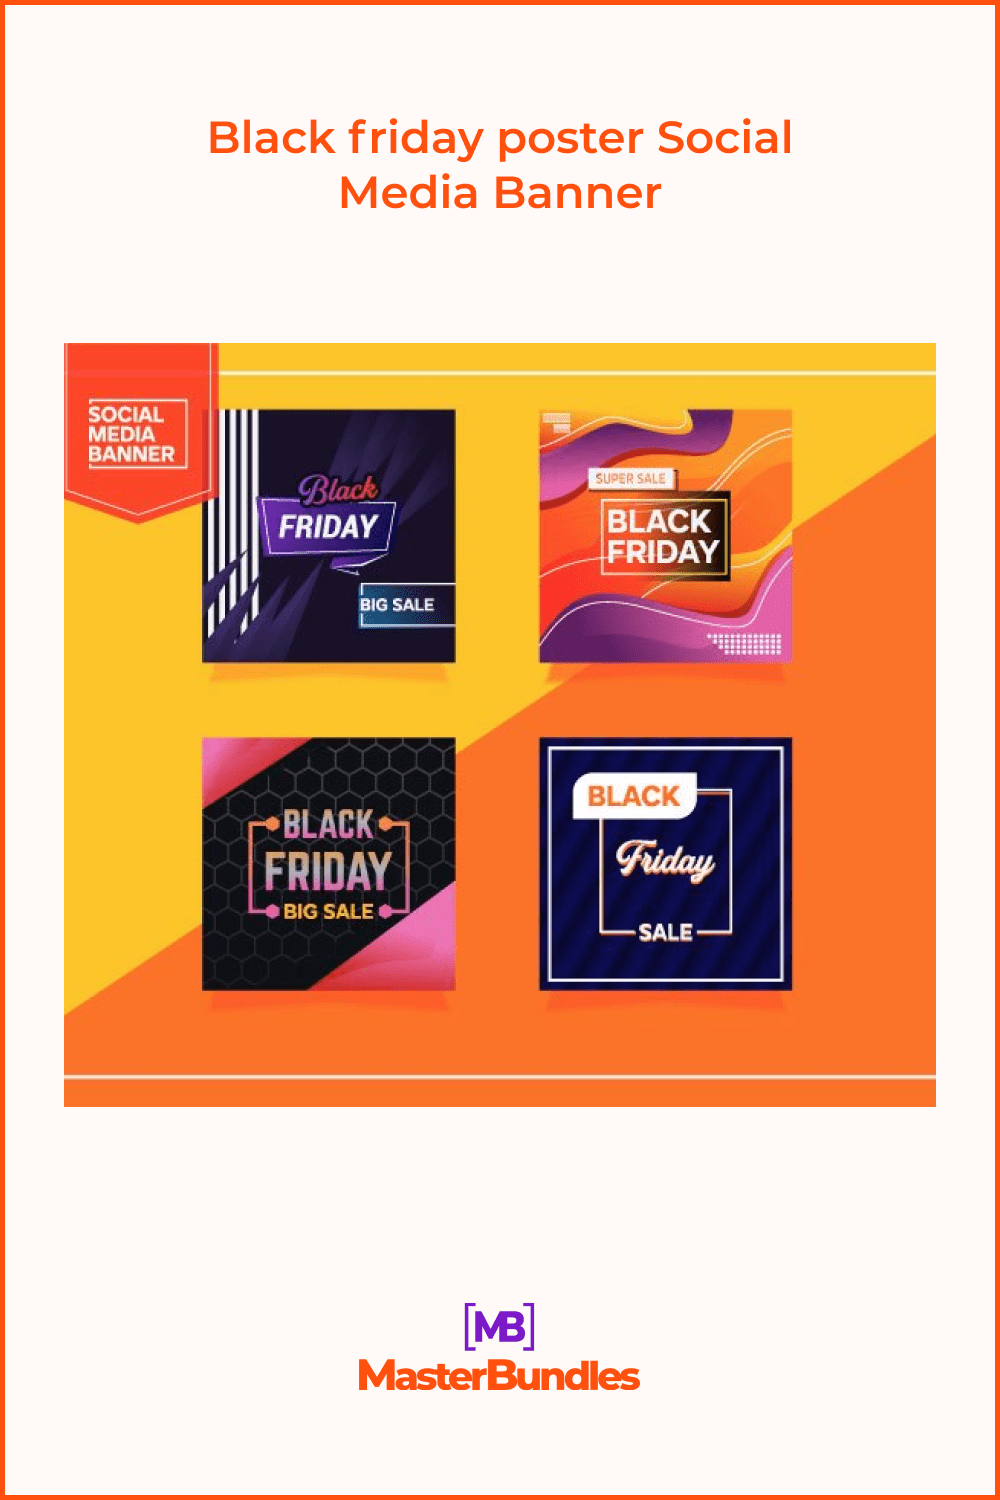 Juicy Vector Social Media Banners for Black Friday.